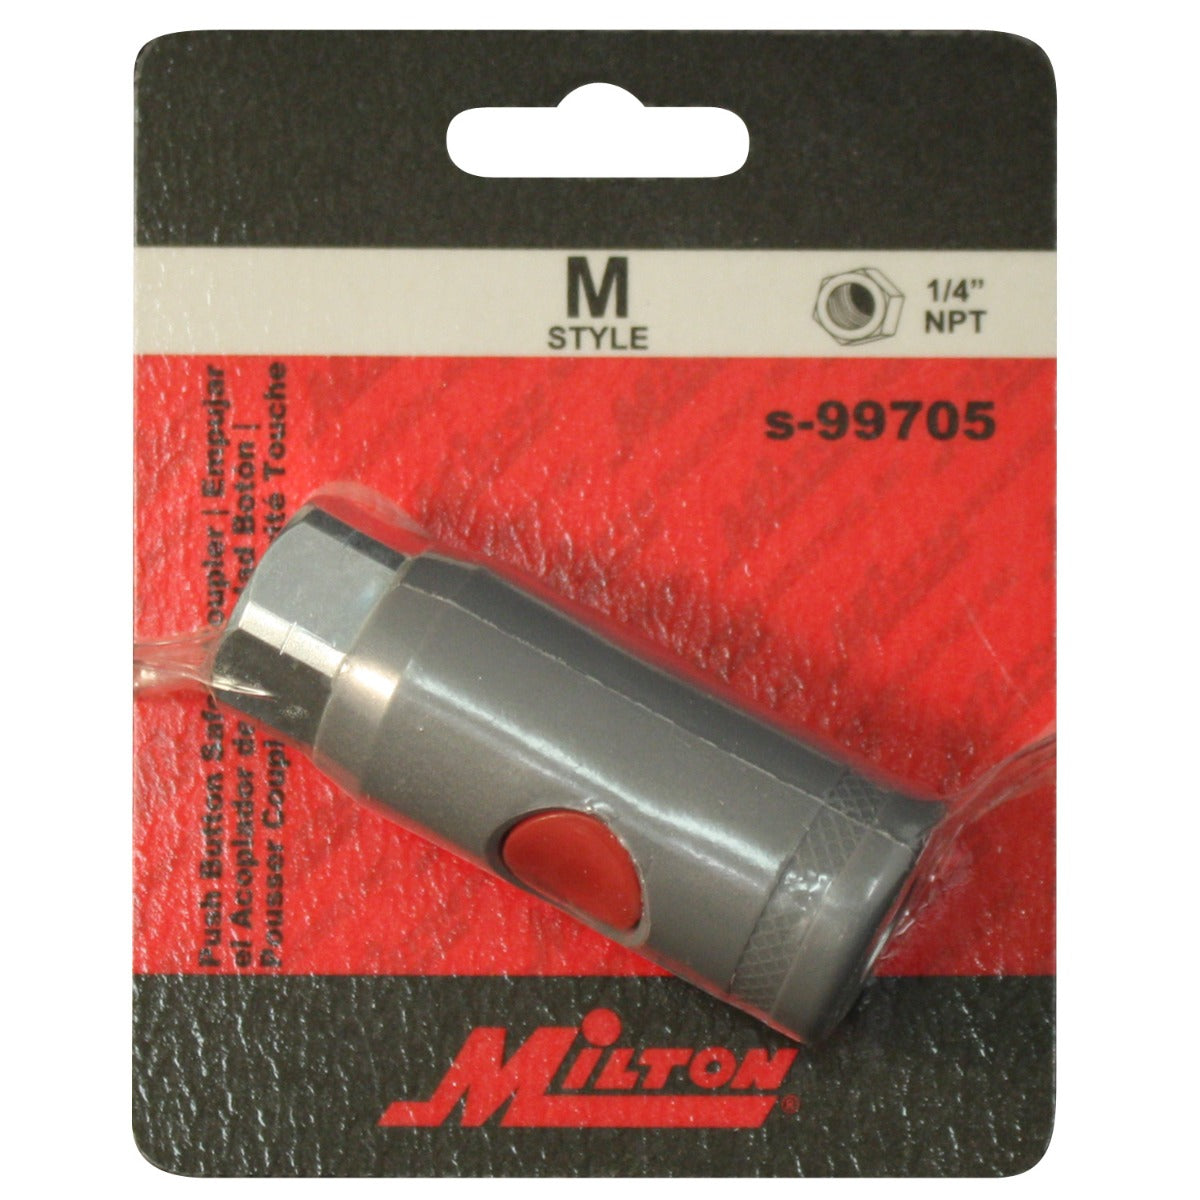 Safety Air Coupler, M-Style 1/4